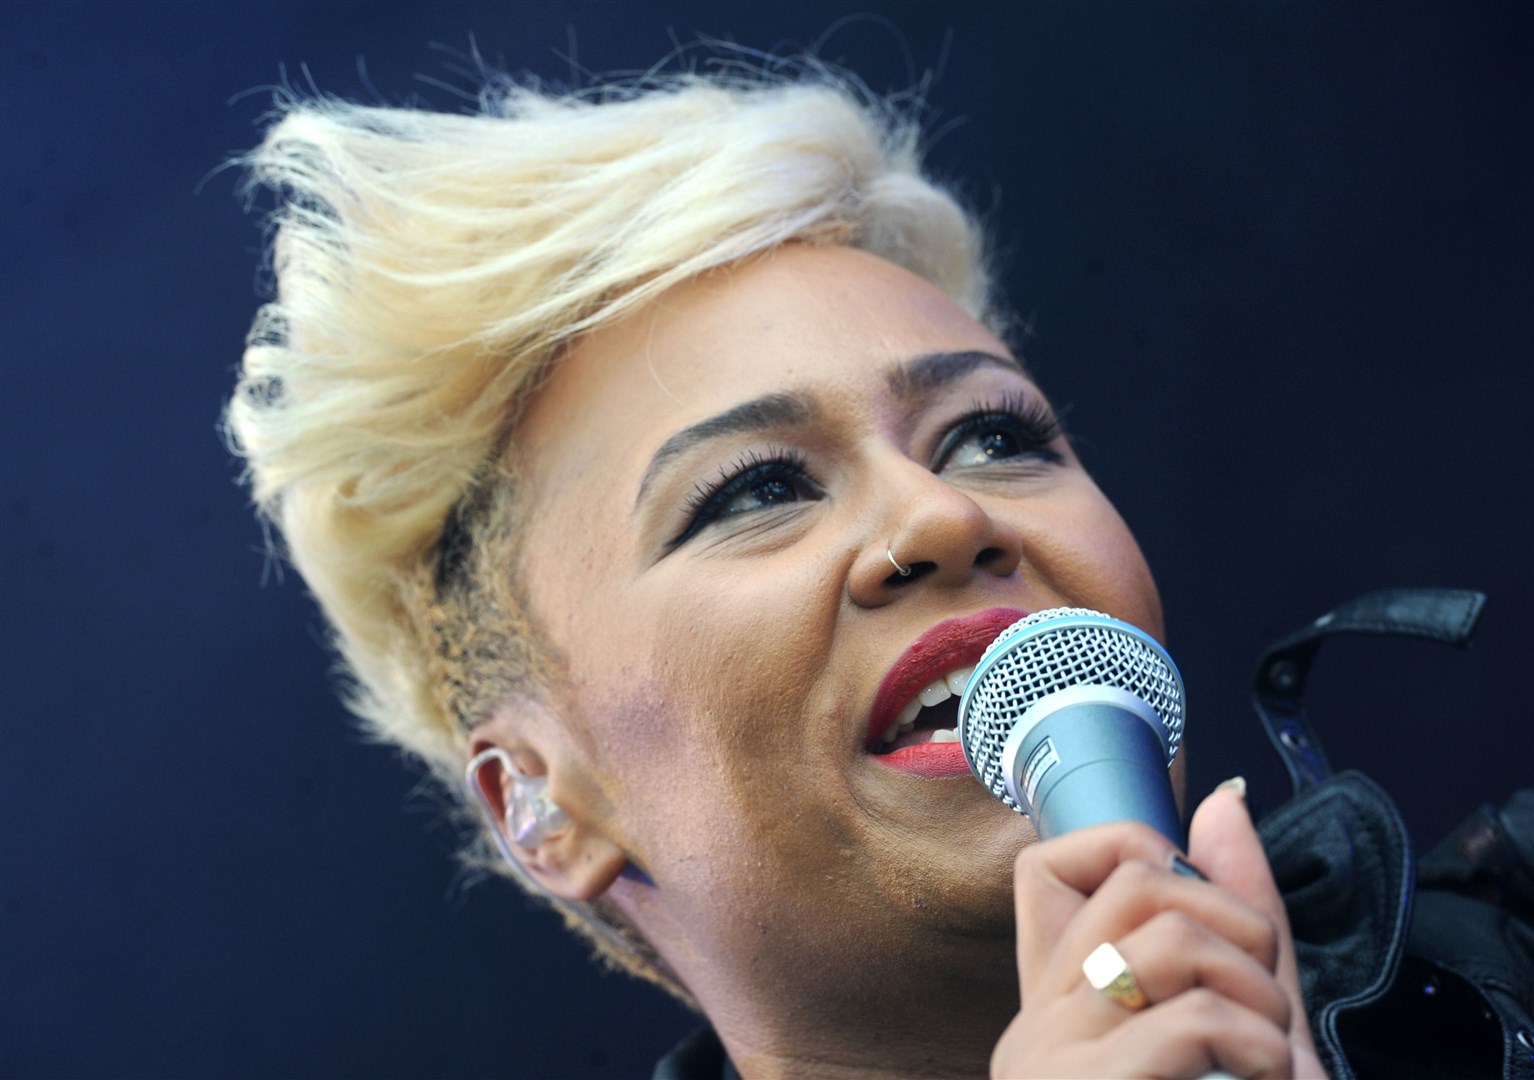 Emeli Sandé was due to have headlined at Belladrum.